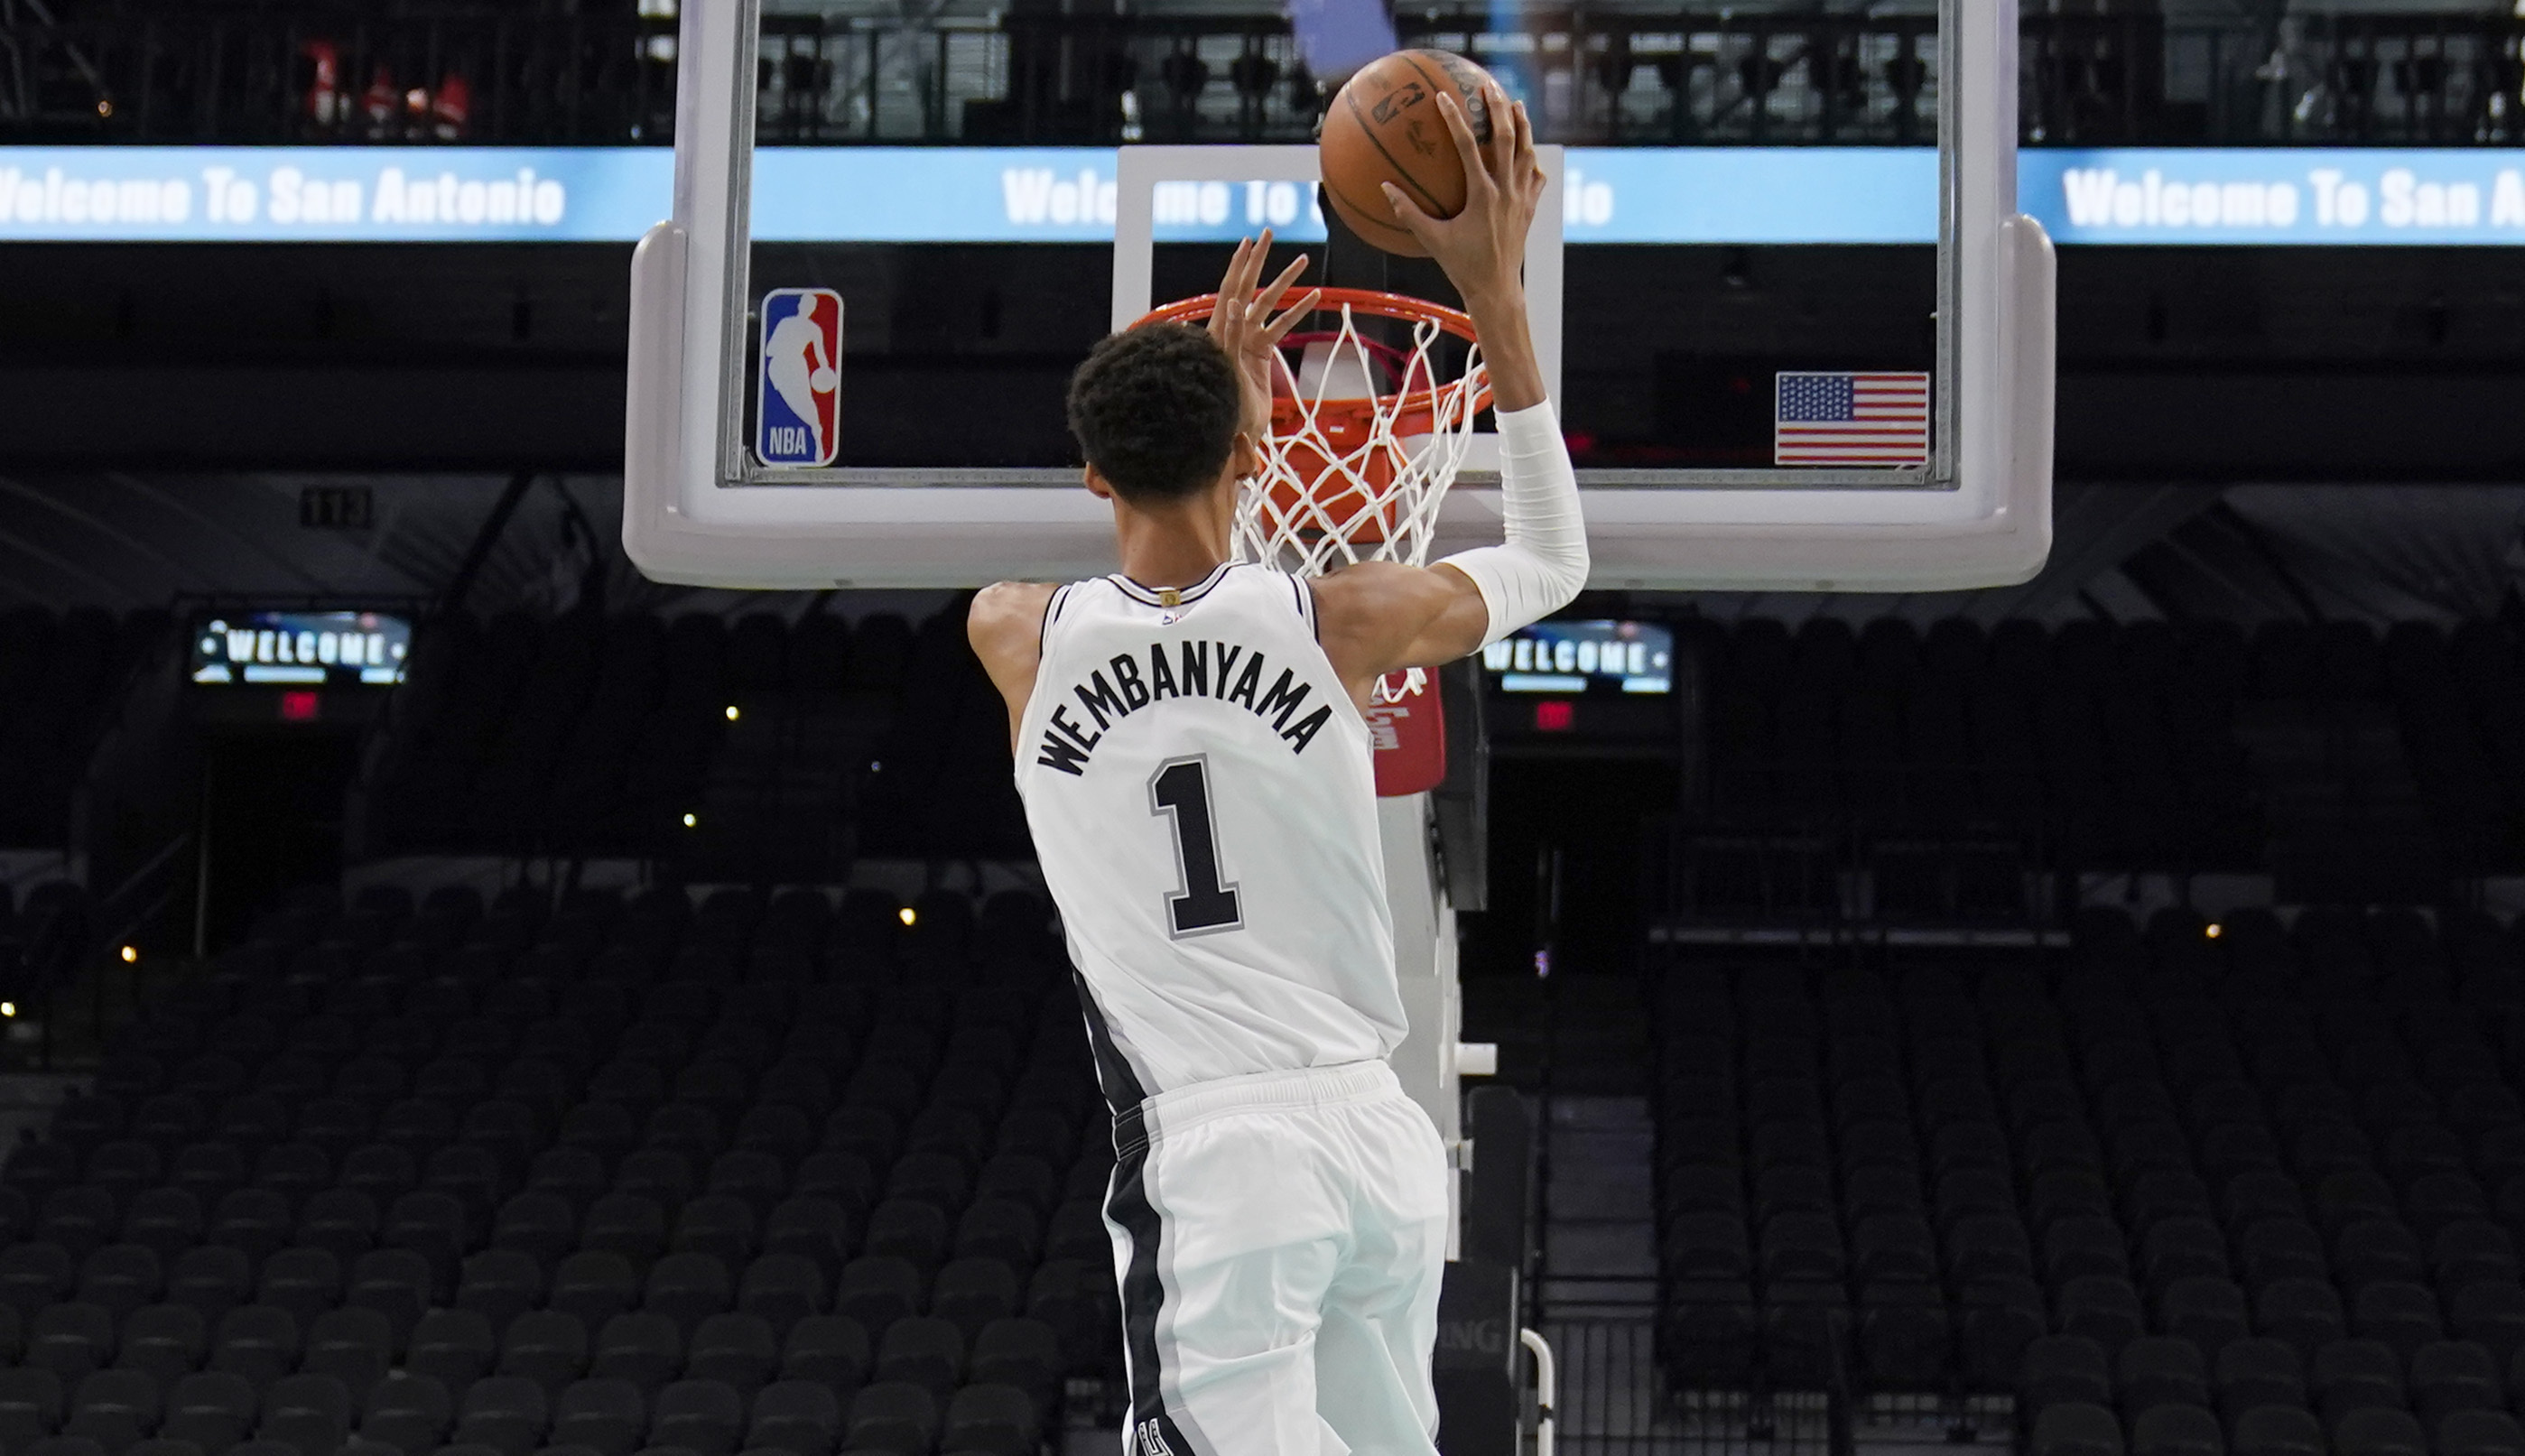 NBA Summer League 2023 FREE LIVE STREAMS (7/3/23) Times, TV channels, schedule for Spurs vs